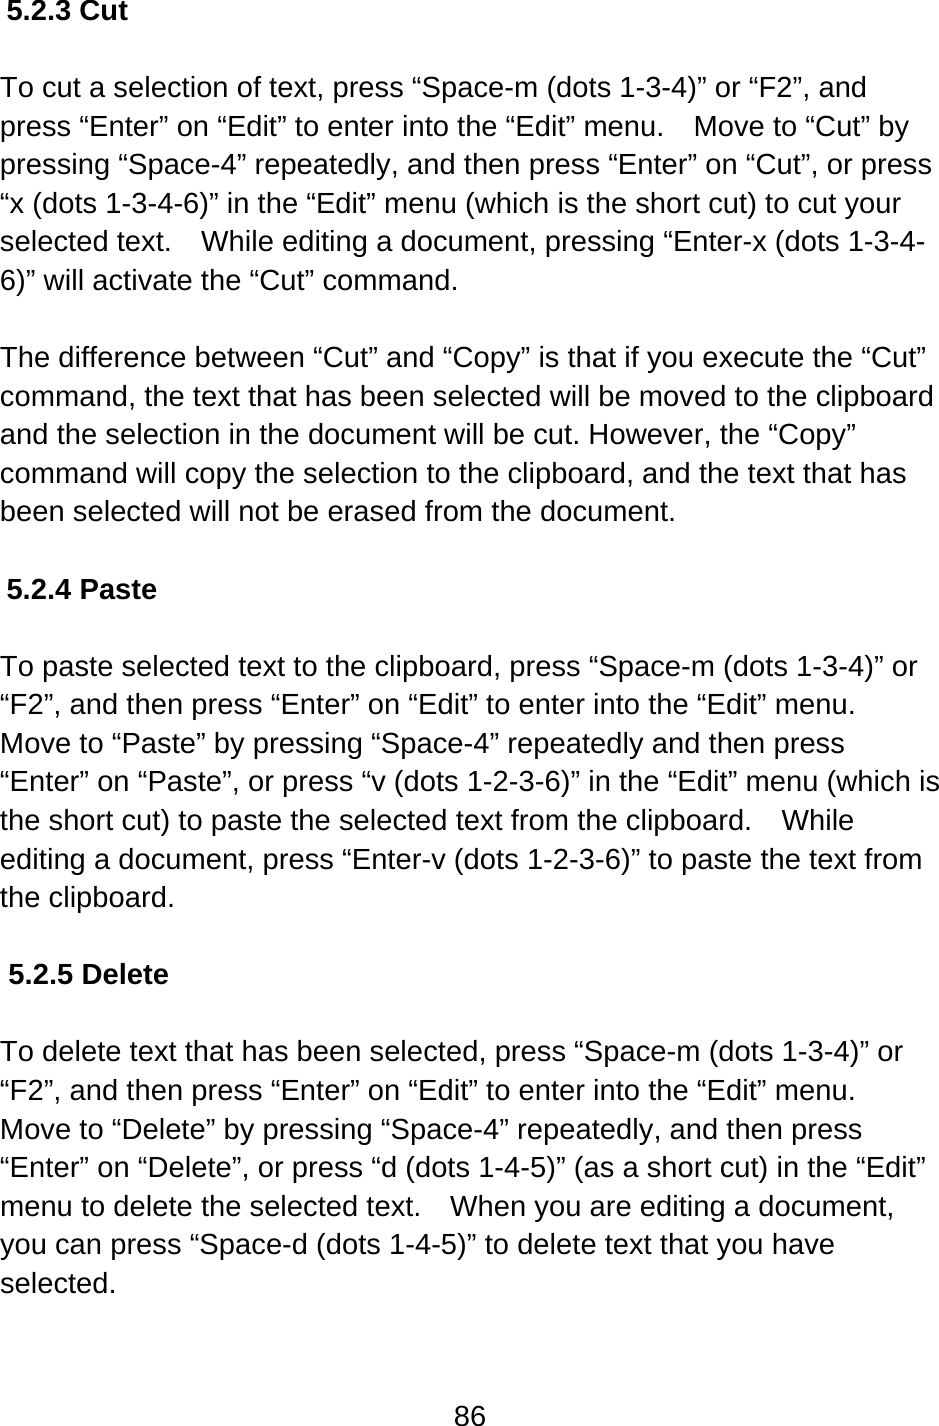 86  5.2.3 Cut  To cut a selection of text, press “Space-m (dots 1-3-4)” or “F2”, and press “Enter” on “Edit” to enter into the “Edit” menu.    Move to “Cut” by pressing “Space-4” repeatedly, and then press “Enter” on “Cut”, or press “x (dots 1-3-4-6)” in the “Edit” menu (which is the short cut) to cut your selected text.    While editing a document, pressing “Enter-x (dots 1-3-4-6)” will activate the “Cut” command.  The difference between “Cut” and “Copy” is that if you execute the “Cut” command, the text that has been selected will be moved to the clipboard and the selection in the document will be cut. However, the “Copy” command will copy the selection to the clipboard, and the text that has been selected will not be erased from the document.  5.2.4 Paste  To paste selected text to the clipboard, press “Space-m (dots 1-3-4)” or “F2”, and then press “Enter” on “Edit” to enter into the “Edit” menu.   Move to “Paste” by pressing “Space-4” repeatedly and then press “Enter” on “Paste”, or press “v (dots 1-2-3-6)” in the “Edit” menu (which is the short cut) to paste the selected text from the clipboard.    While editing a document, press “Enter-v (dots 1-2-3-6)” to paste the text from the clipboard.  5.2.5 Delete  To delete text that has been selected, press “Space-m (dots 1-3-4)” or “F2”, and then press “Enter” on “Edit” to enter into the “Edit” menu.   Move to “Delete” by pressing “Space-4” repeatedly, and then press “Enter” on “Delete”, or press “d (dots 1-4-5)” (as a short cut) in the “Edit” menu to delete the selected text.  When you are editing a document, you can press “Space-d (dots 1-4-5)” to delete text that you have selected.  